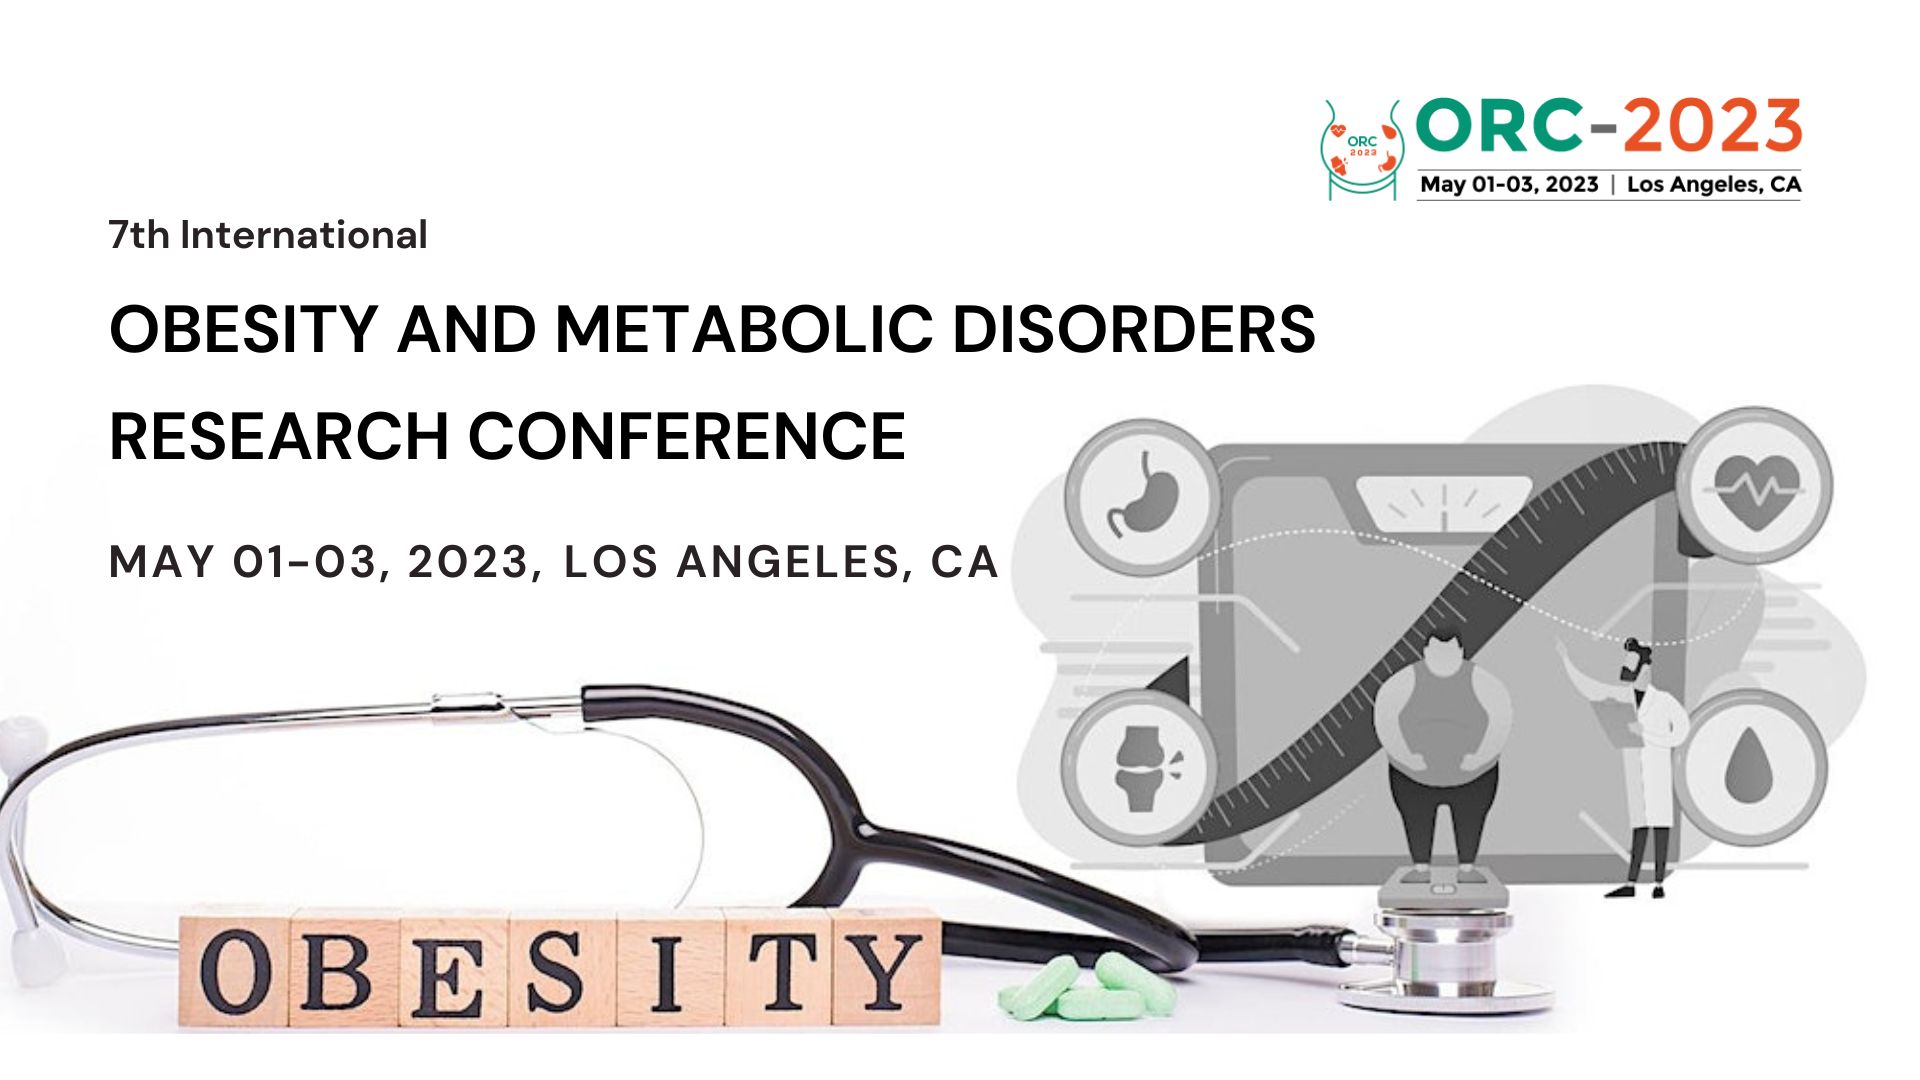 7th International Obesity and Metabolic Disorders Research Conference